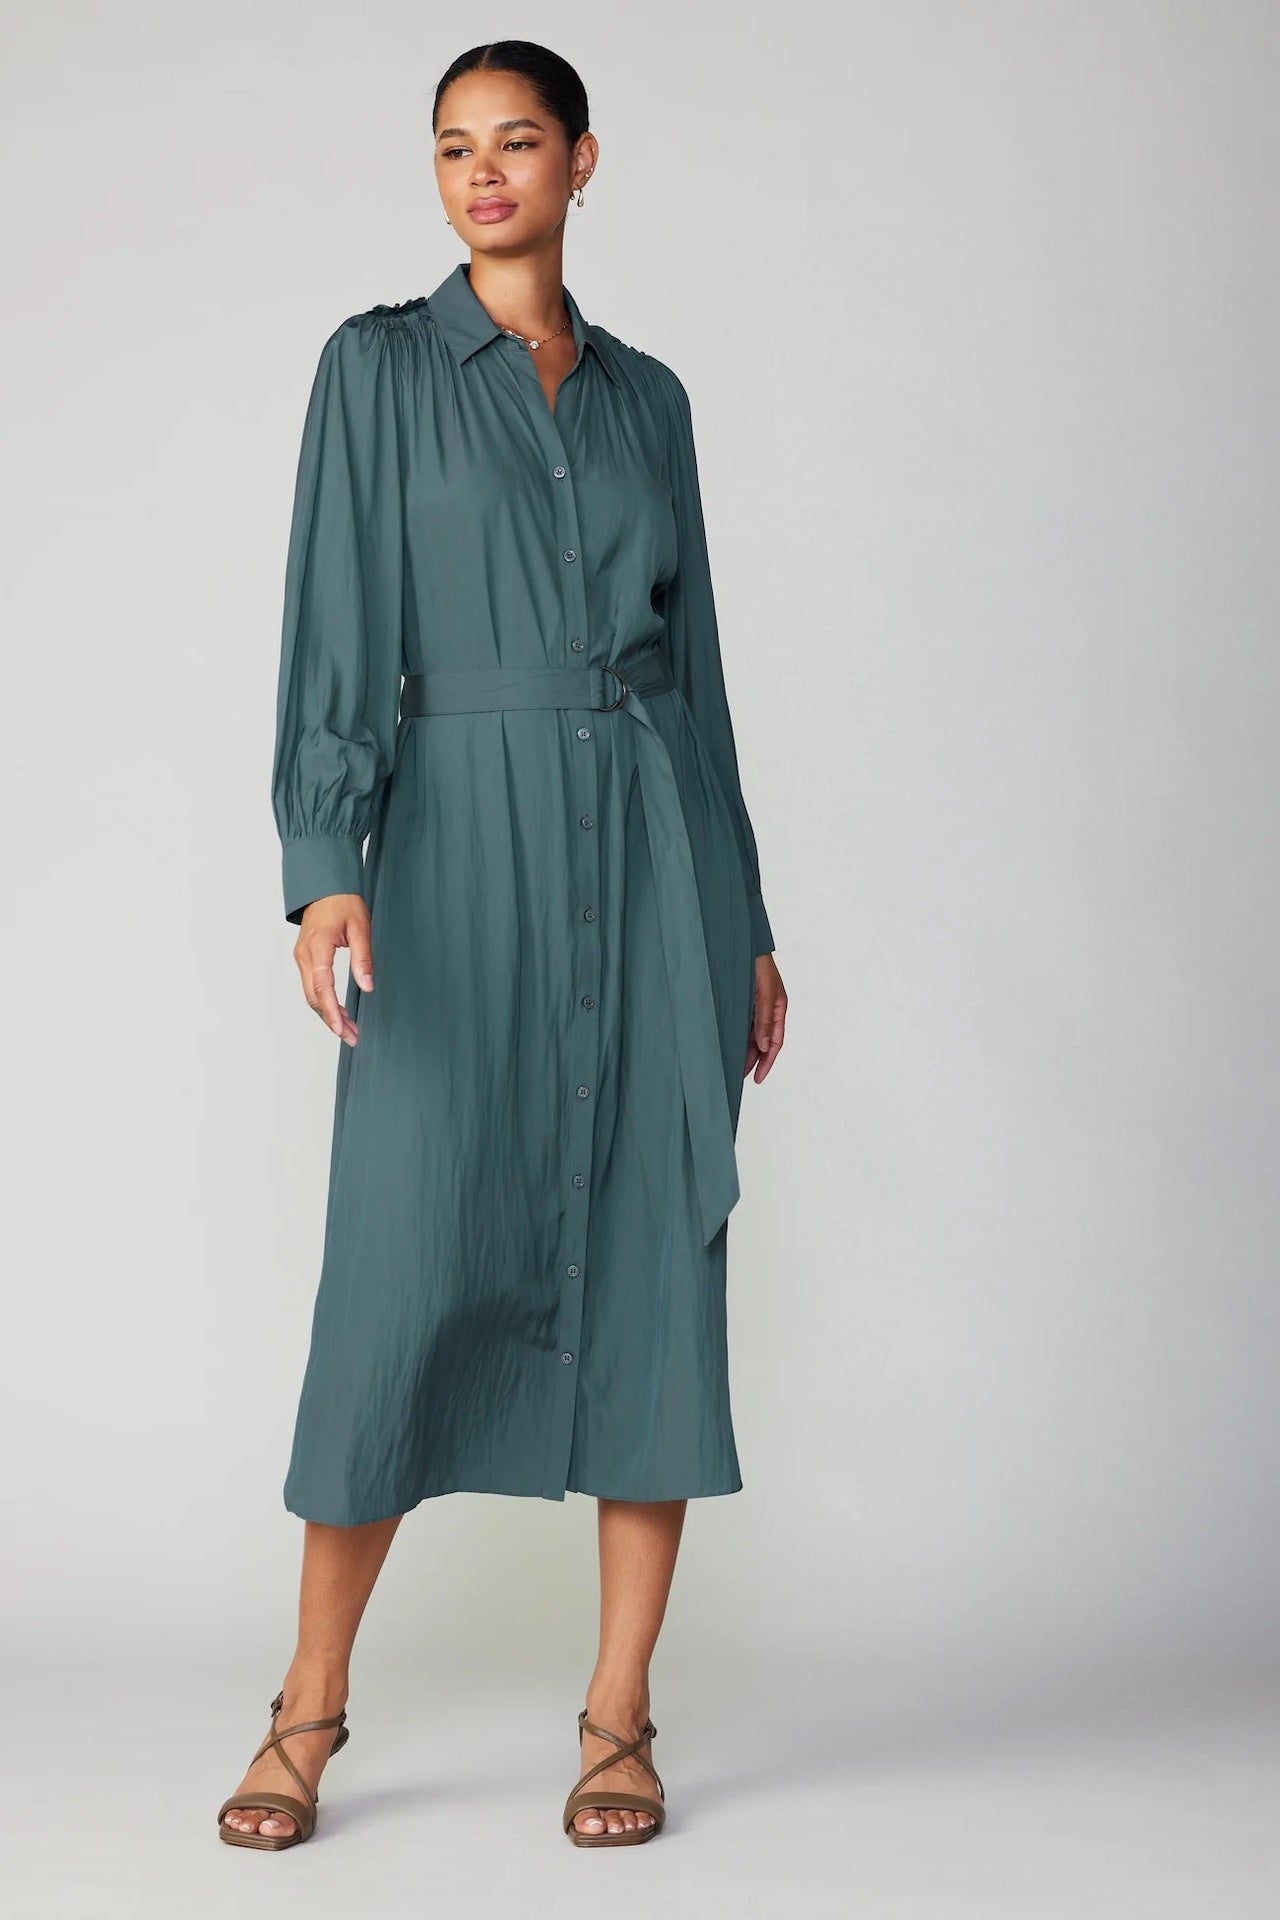 forest green midi long sleeve dress with a belt and button down style